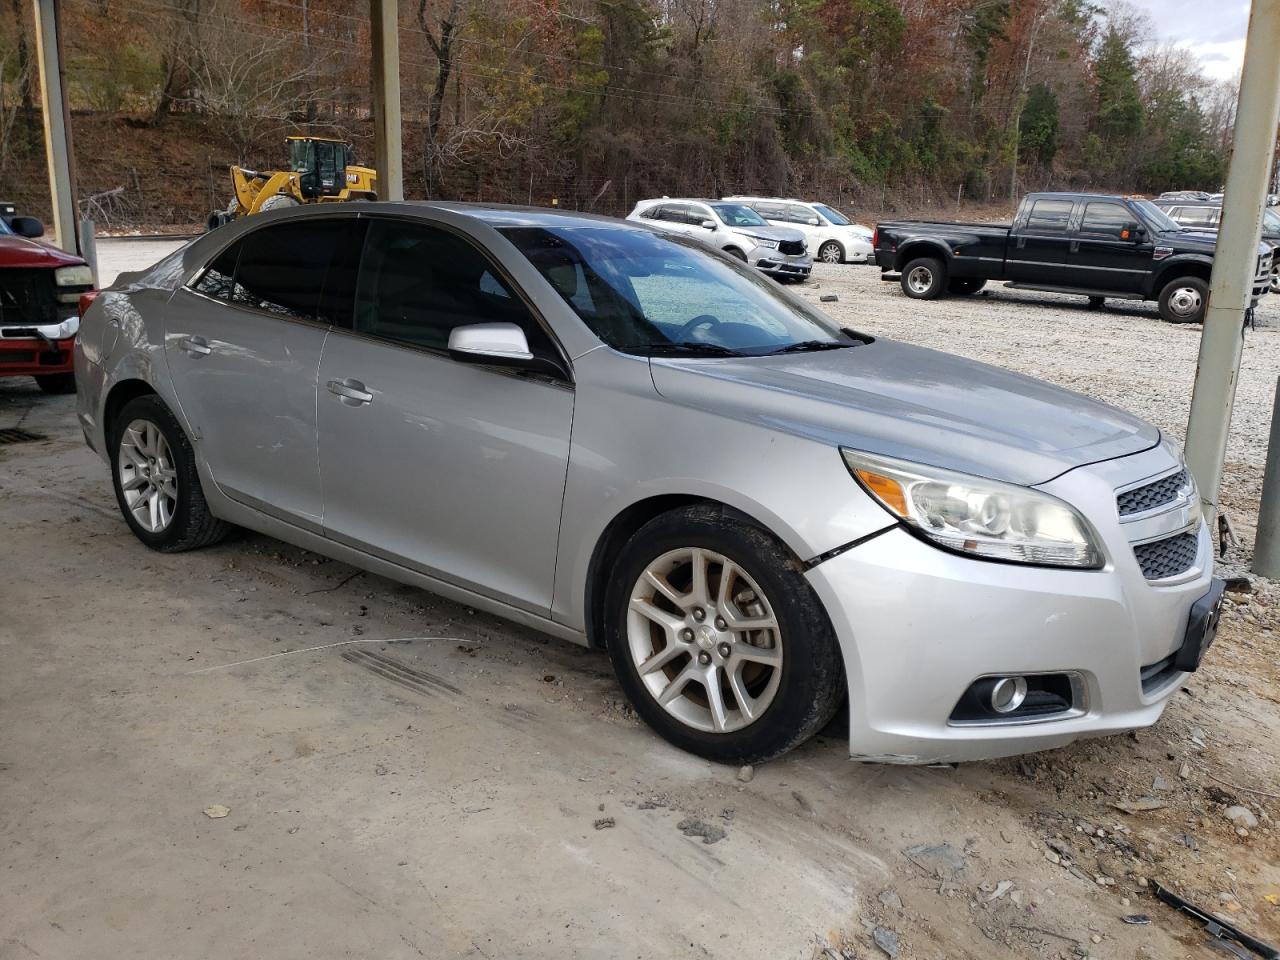 1G11F5RR1DF****** Salvage and Wrecked 2013 Chevrolet Malibu in Alabama State